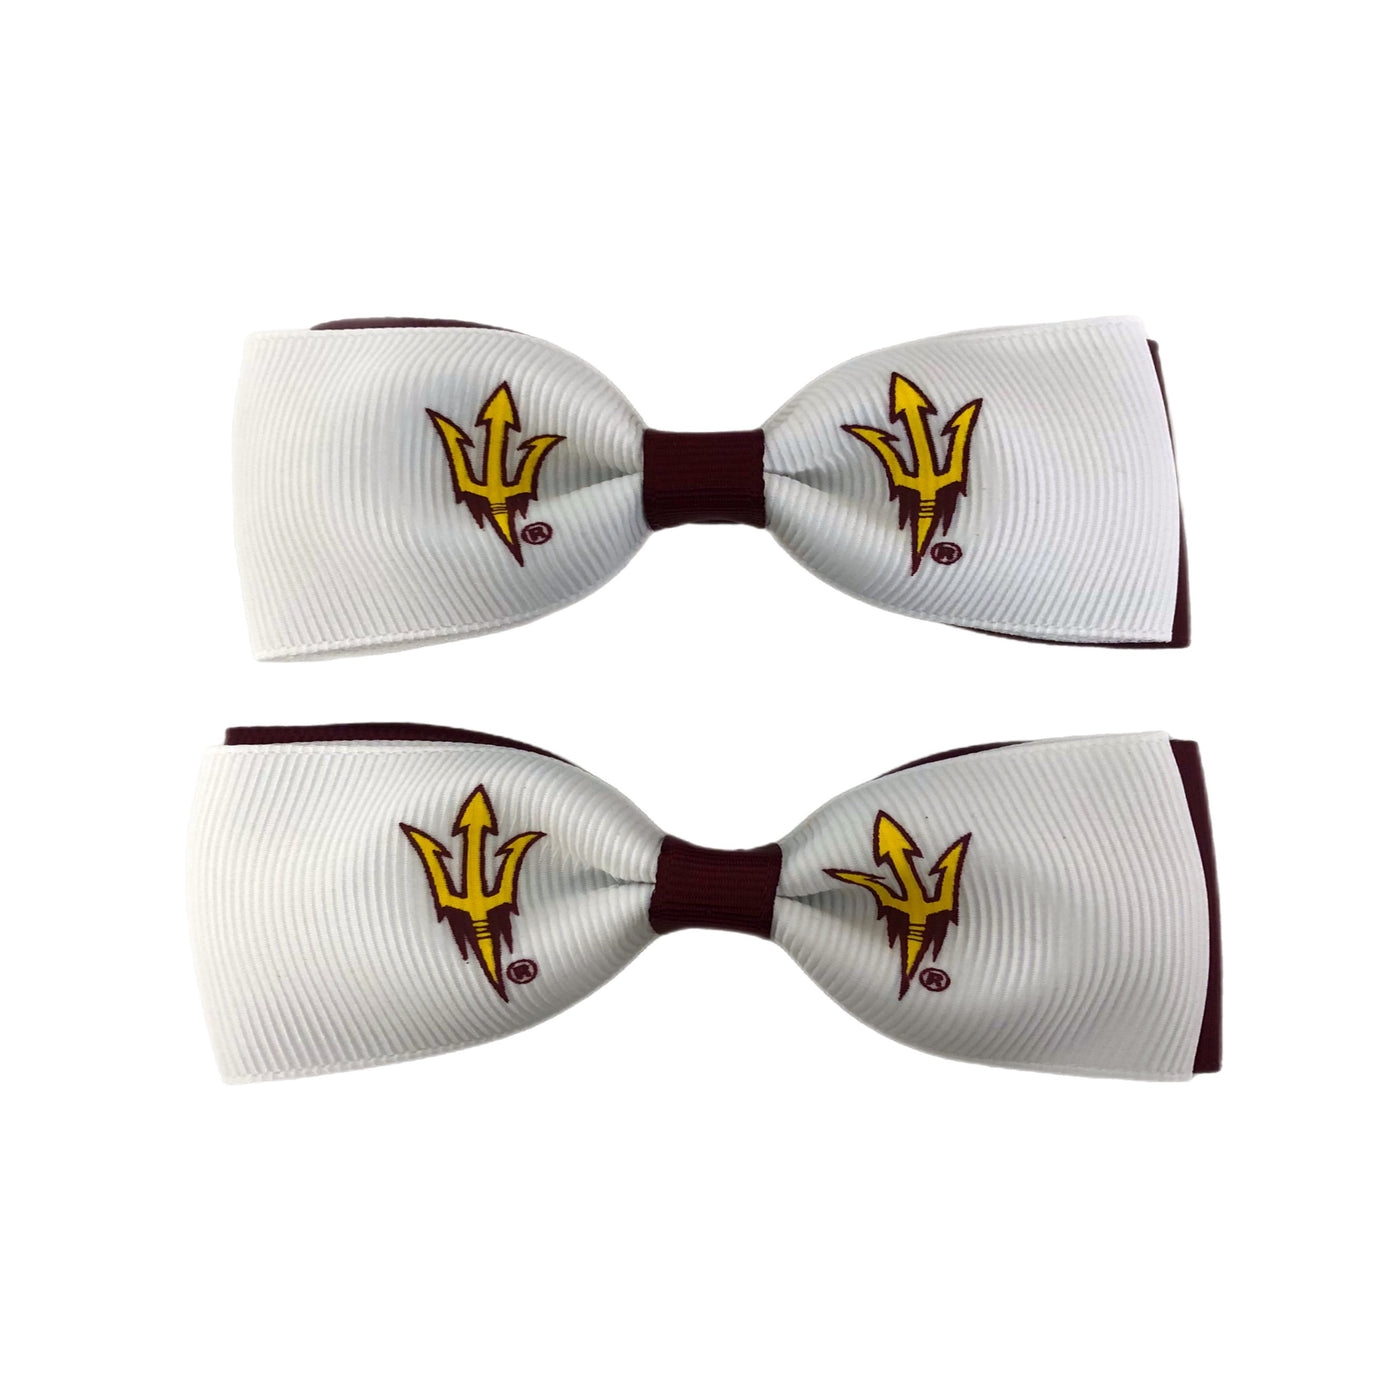 2 ASU white bows with pitchforks that is layered over a maroon bow.